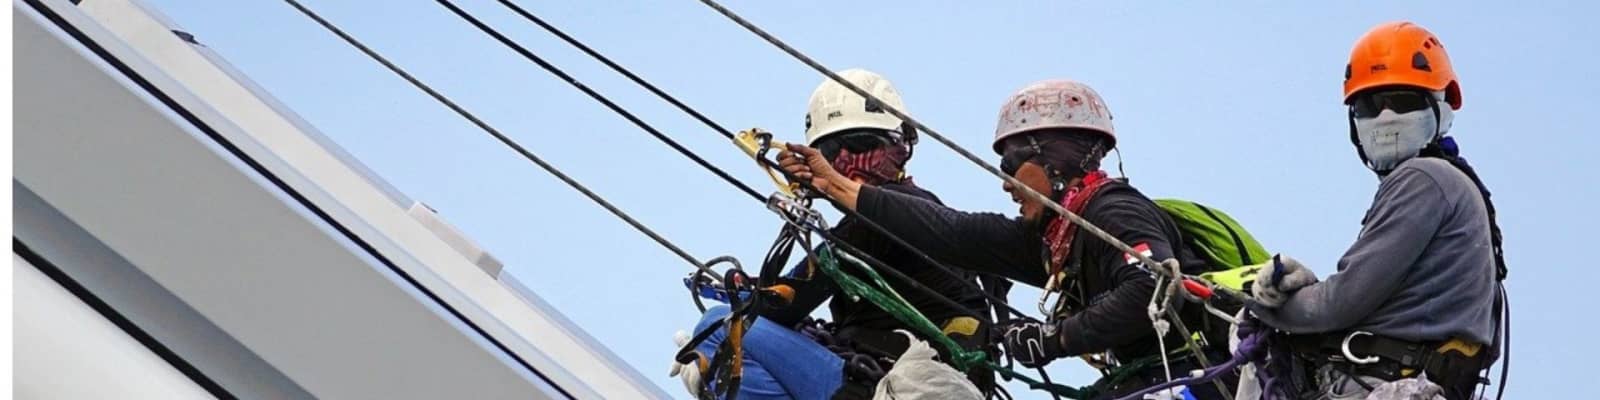 rope access pros in Sandton